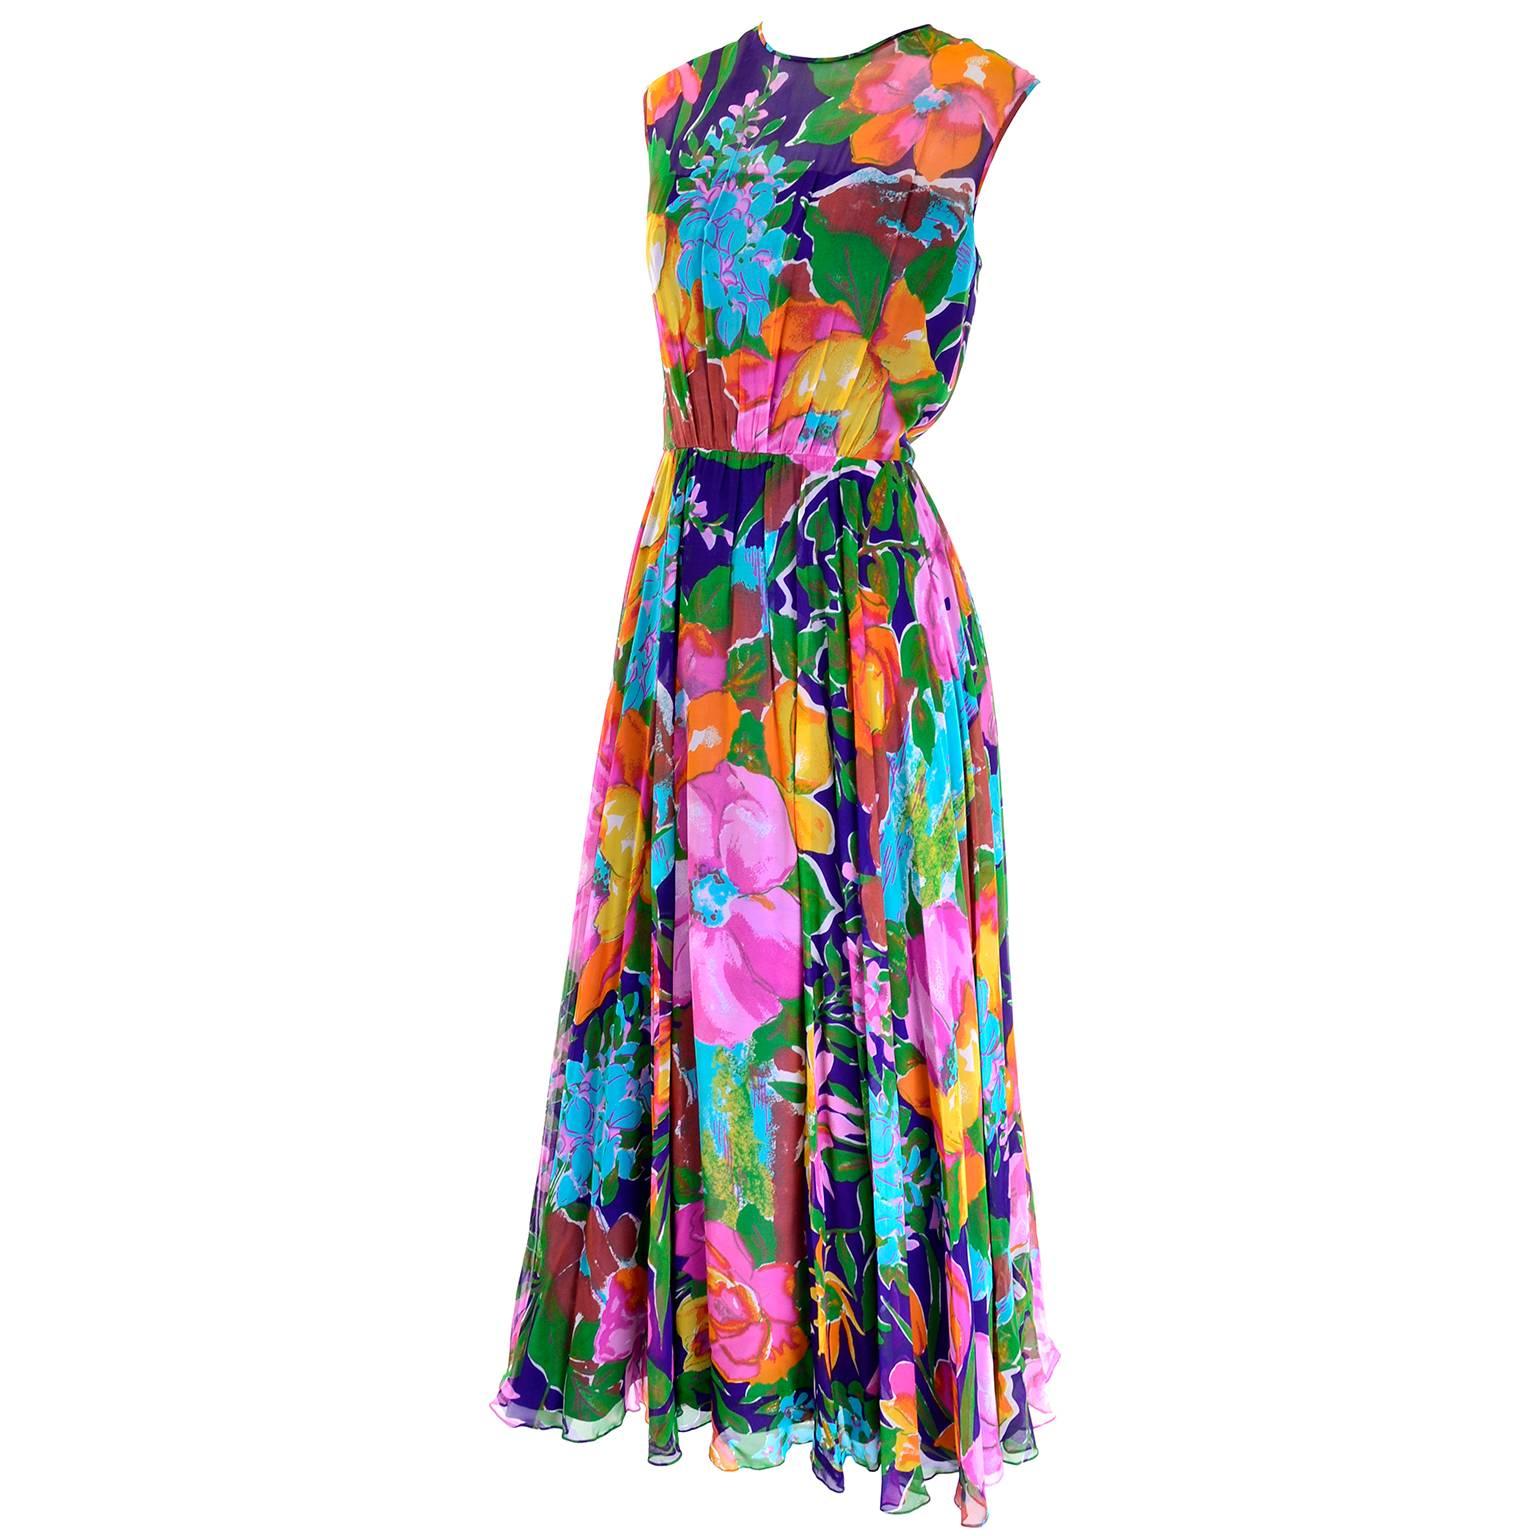 Women's 1970s Vintage Sleeveless Dress in a Bright Floral Chiffon Print